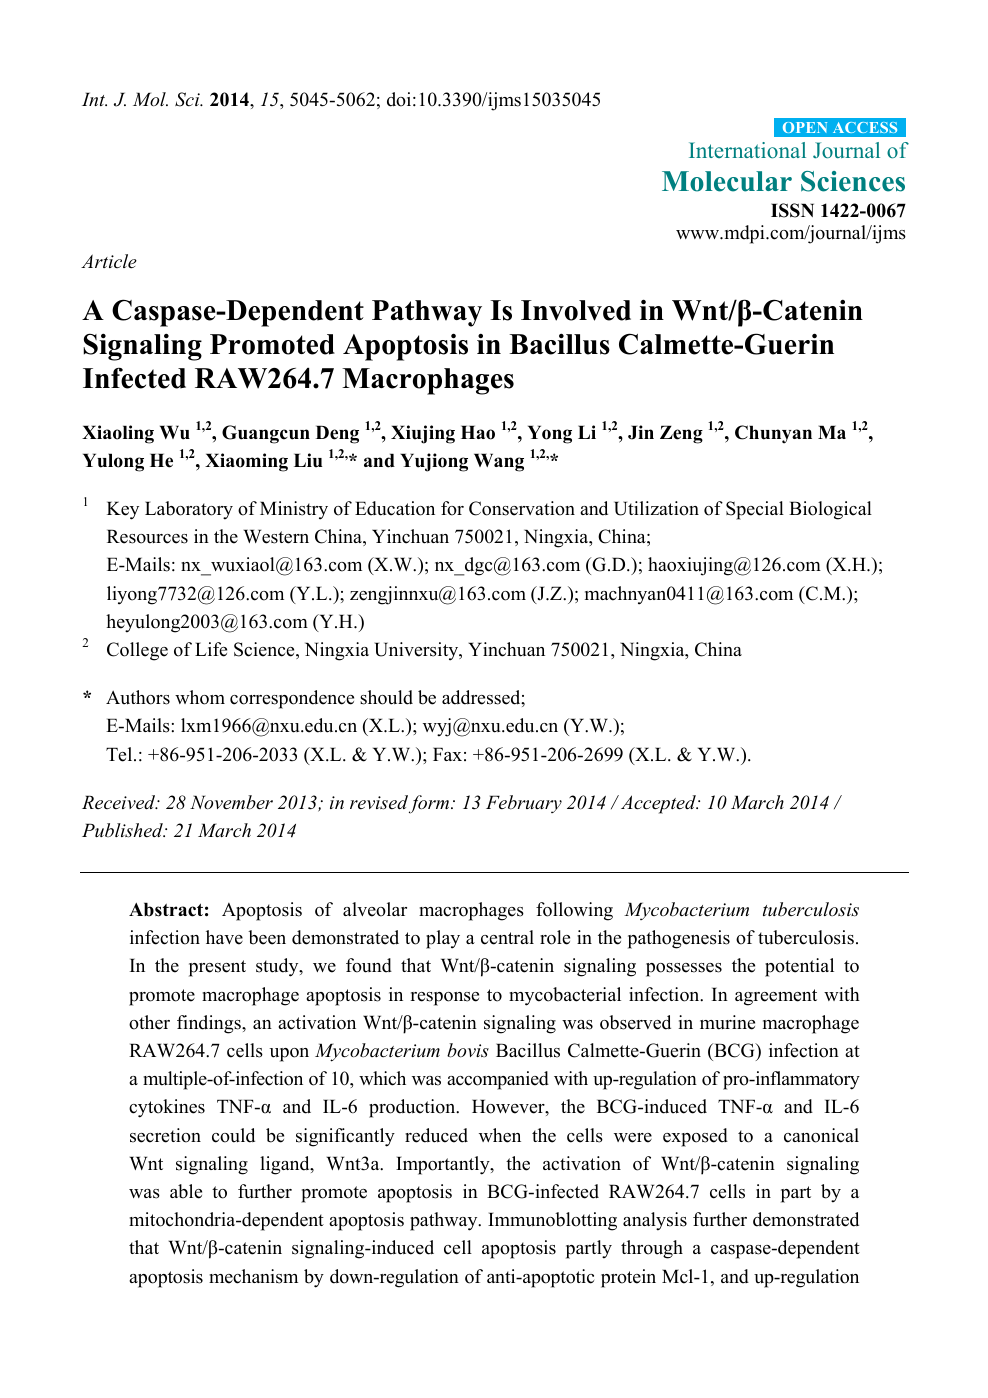 A Caspase Dependent Pathway Is Involved In Wnt B Catenin Signaling Promoted Apoptosis In Bacillus Calmette Guerin Infected Raw264 7 Macrophages Topic Of Research Paper In Biological Sciences Download Scholarly Article Pdf And Read For Free